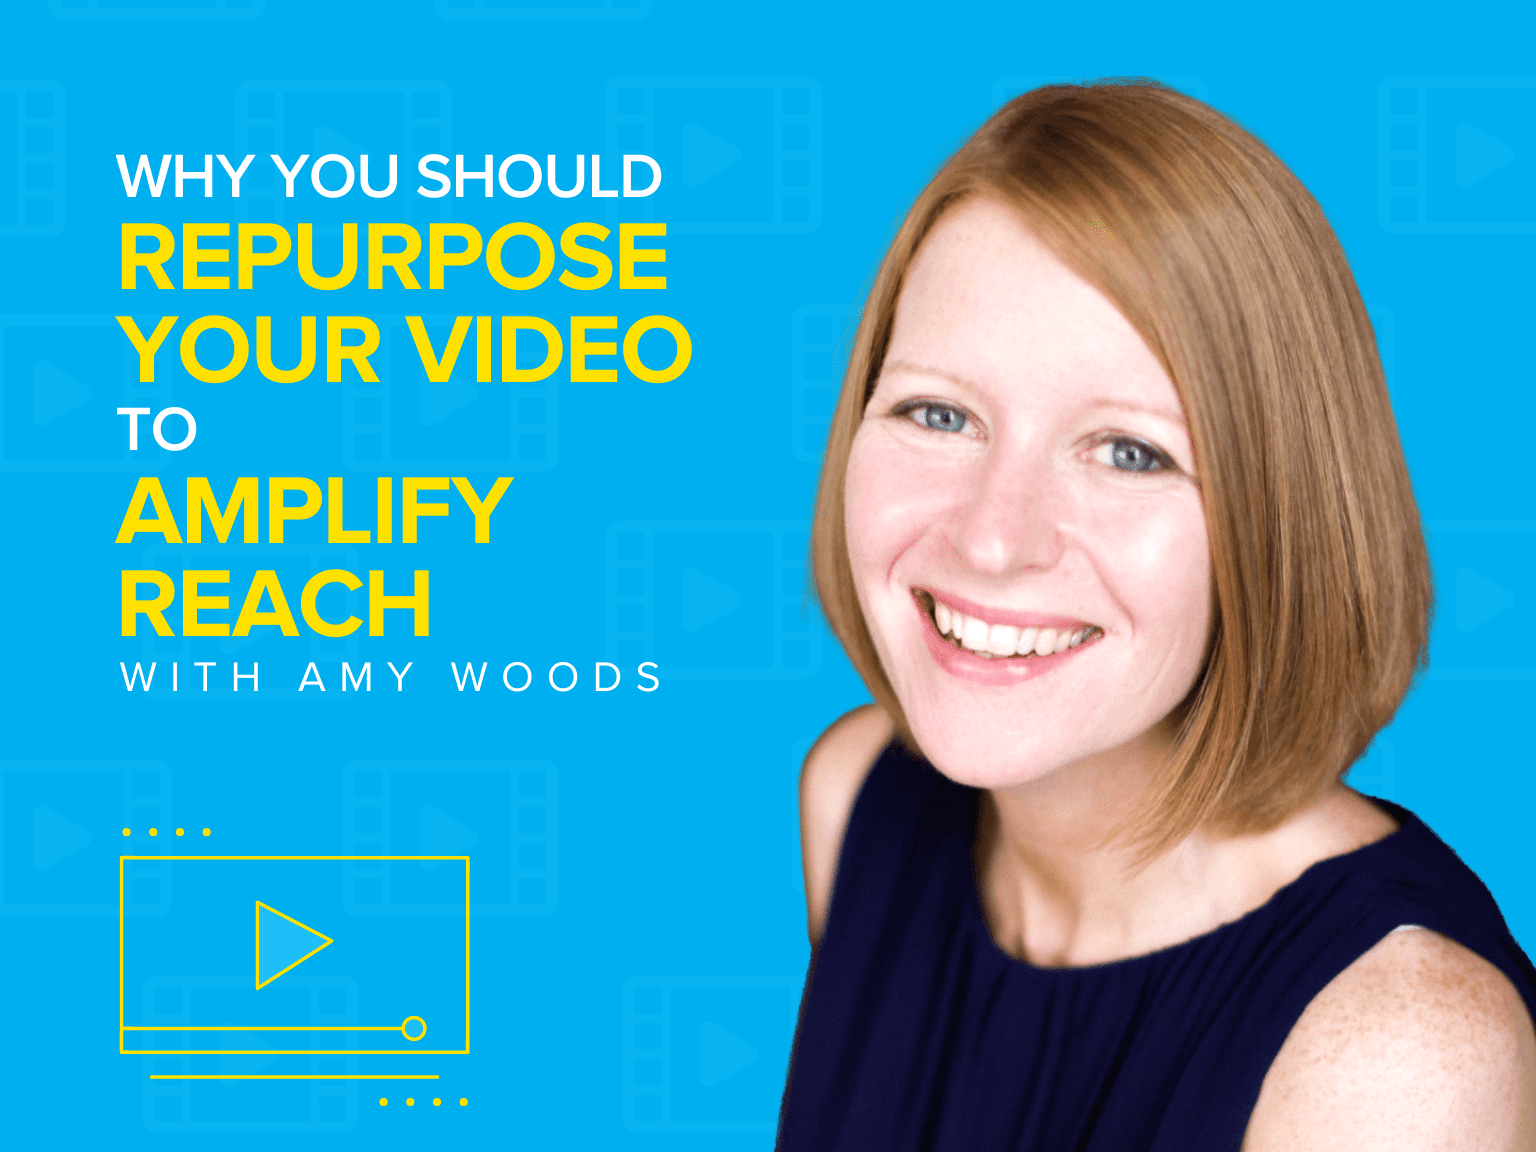 Why You Should Repurpose Your Video to Amplify Reach with Amy Woods